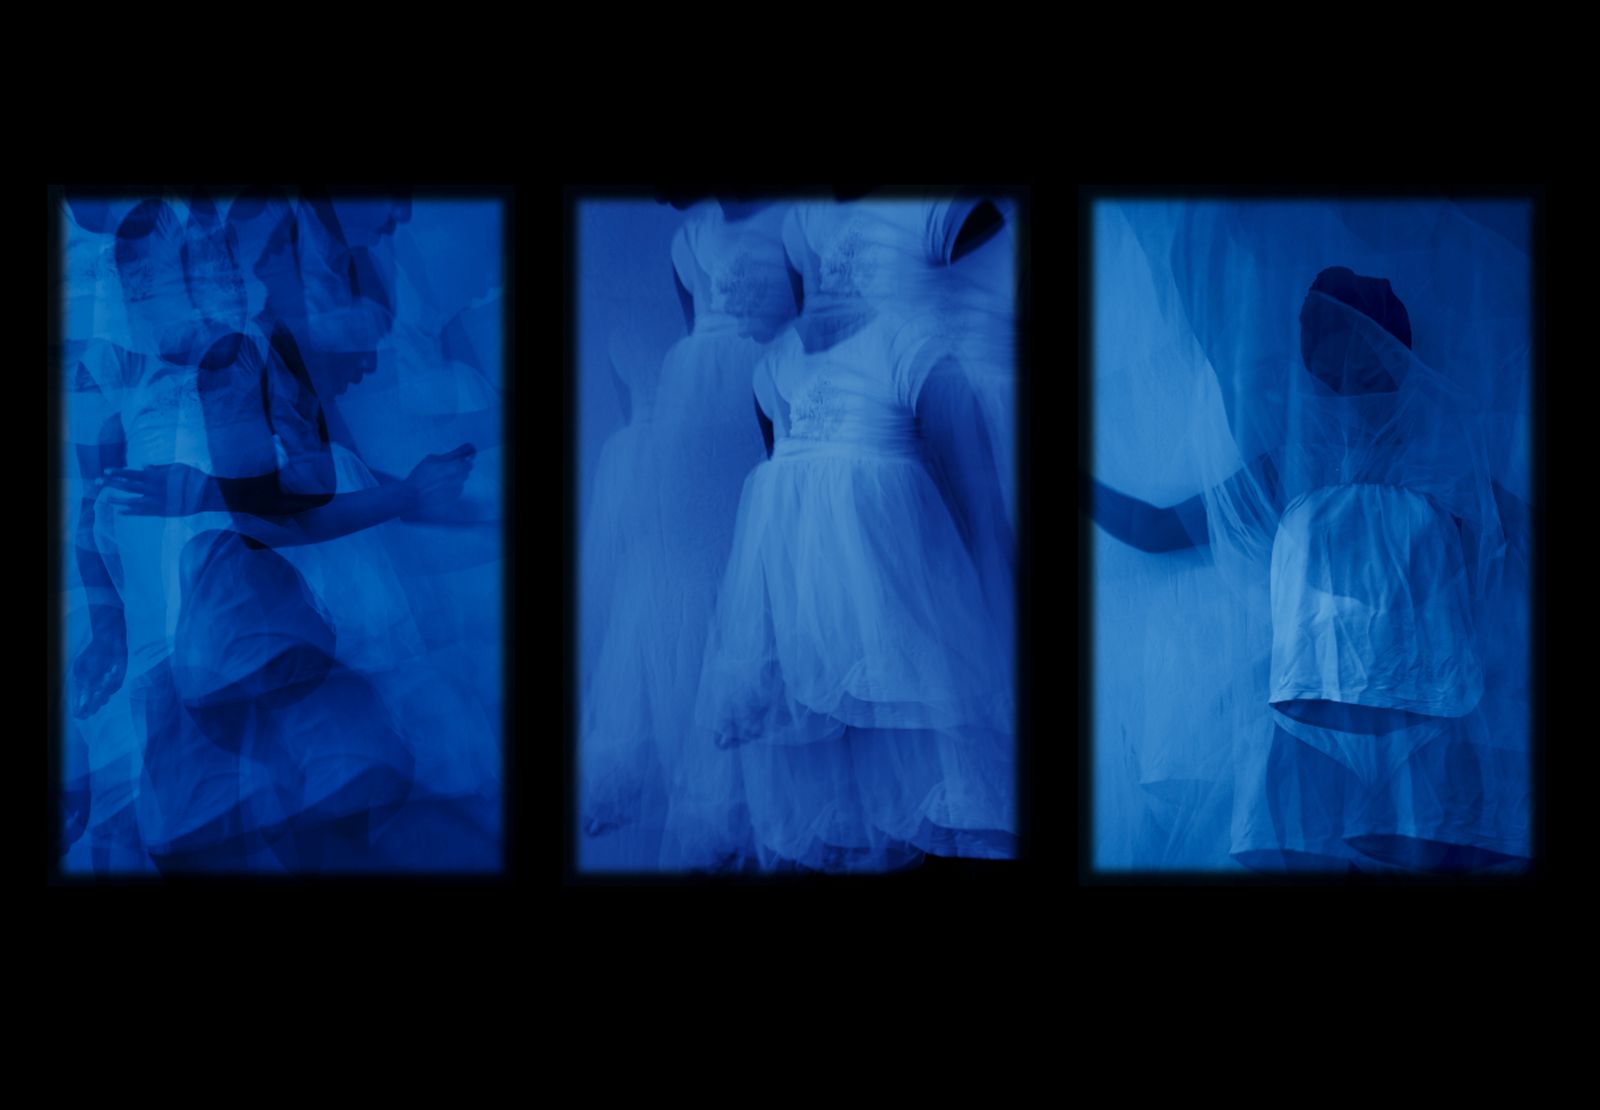 © Heather Agyepong - The O Daughter (Triptych) ego death, Commissioned by Jerwood Arts & Photoworks, 2022